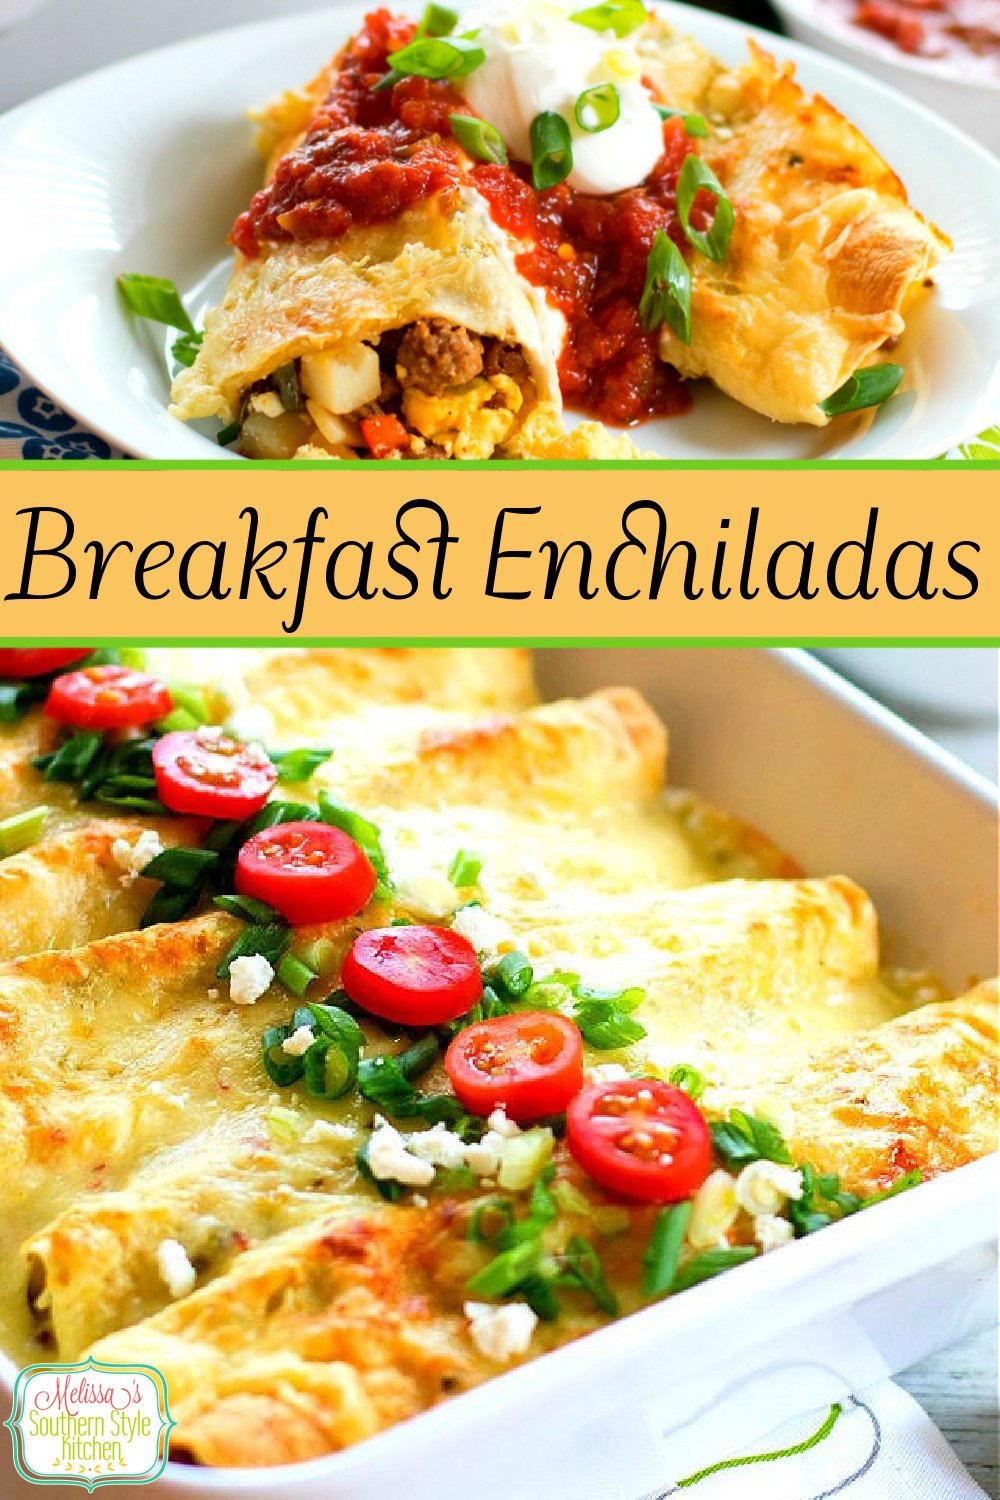 Breakfast Enchiladas wrap-up everything you love about breakfast in tortillas smothered with a creamy salsa verde sauce #breakfastenchiladas #breakfast #enchiladas #eggs #sausage #casseroles #brunch #mexicanfood #salsaverde #salsa #southernfood #southernrecipes via @melissasssk